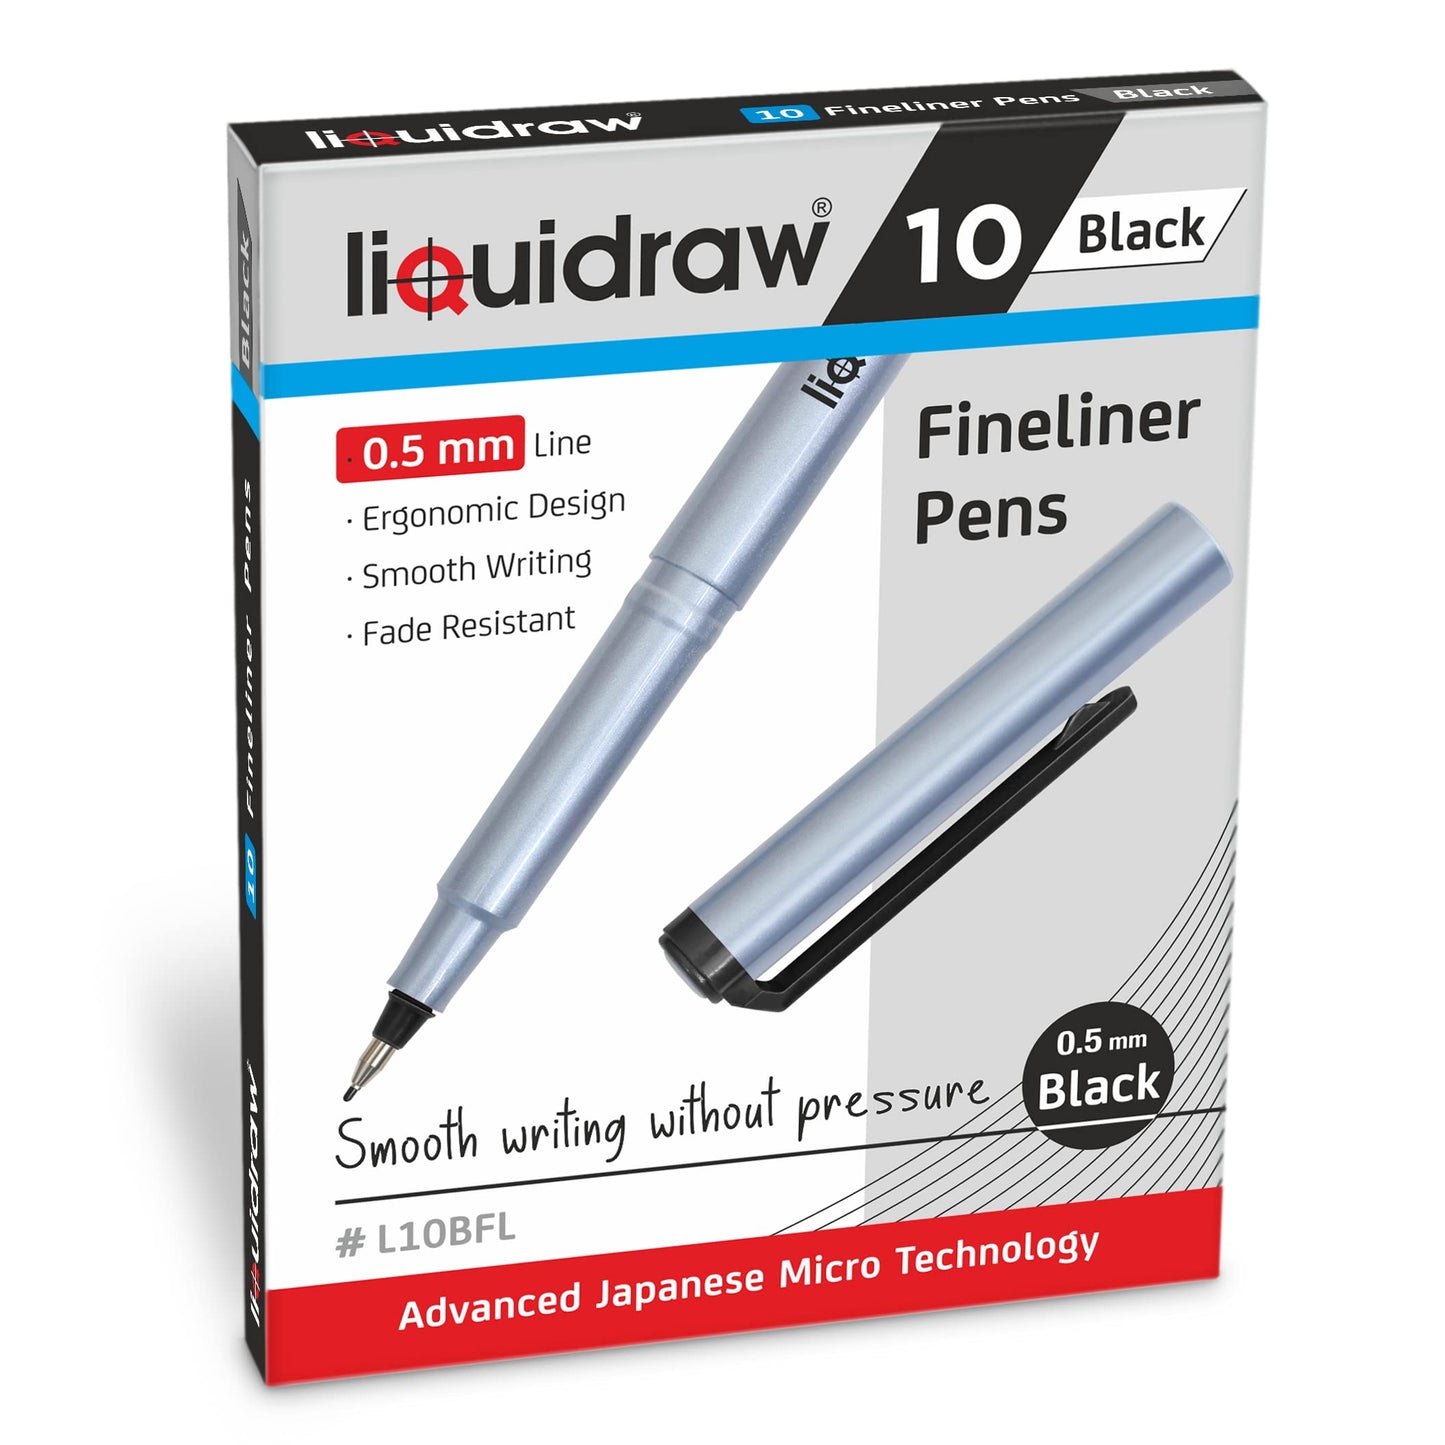 Liquidraw 10 Black Fineliner Pens Set Fine Point Pens 0.5mm Fineliners Black Coloured Pens For Artists, Architects, Technical Drawing, Handwriting, Calligraphy, Sketching, & Illustrations